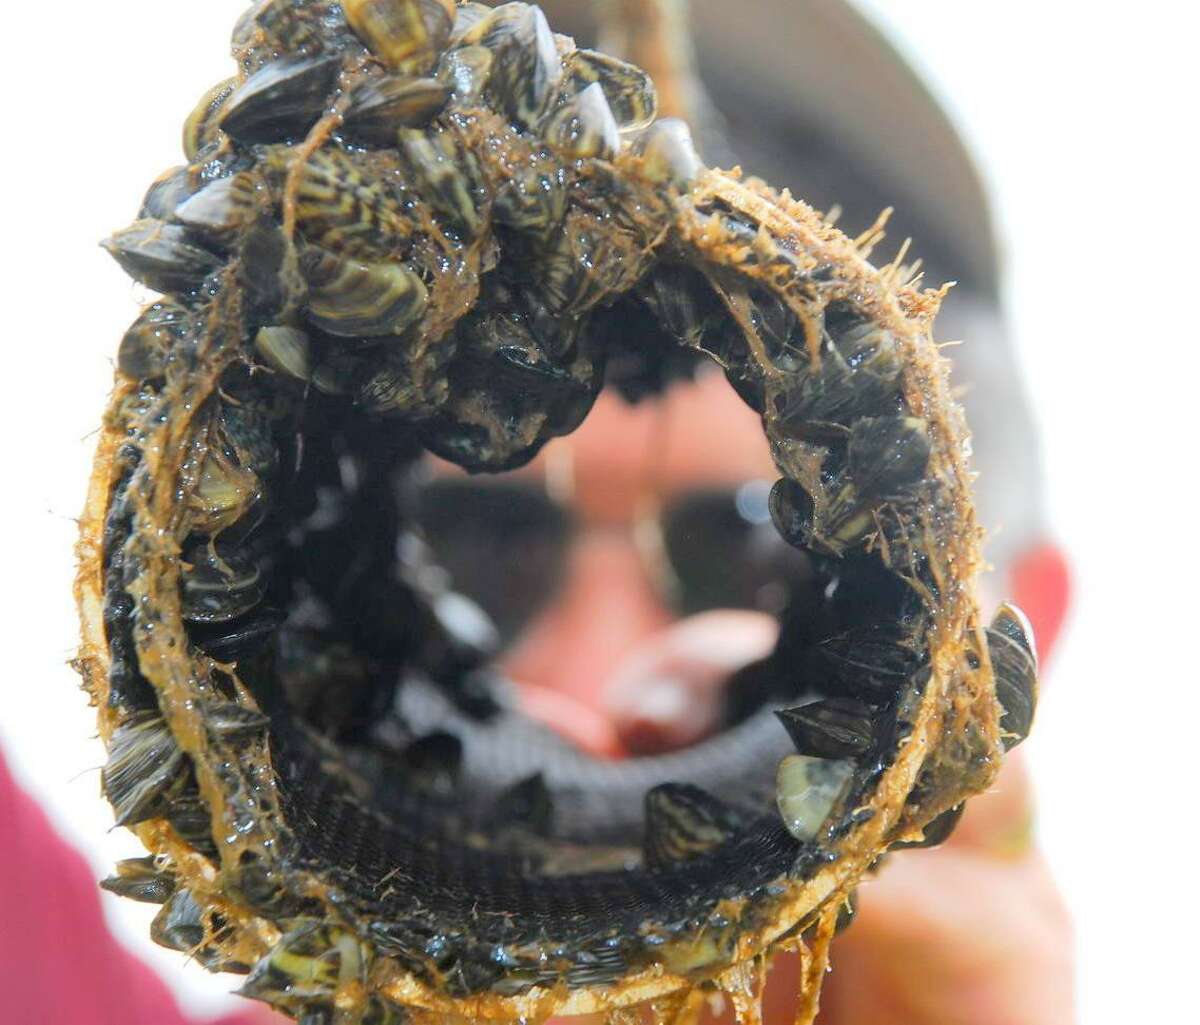 Invasive zebra mussels put native fisheries at risk and can coat and clog water infrastructure, such as pipes, causing millions of dollars in damage. Canyon Lake is the latest Texas lake where the non-native mollusks have been documented.